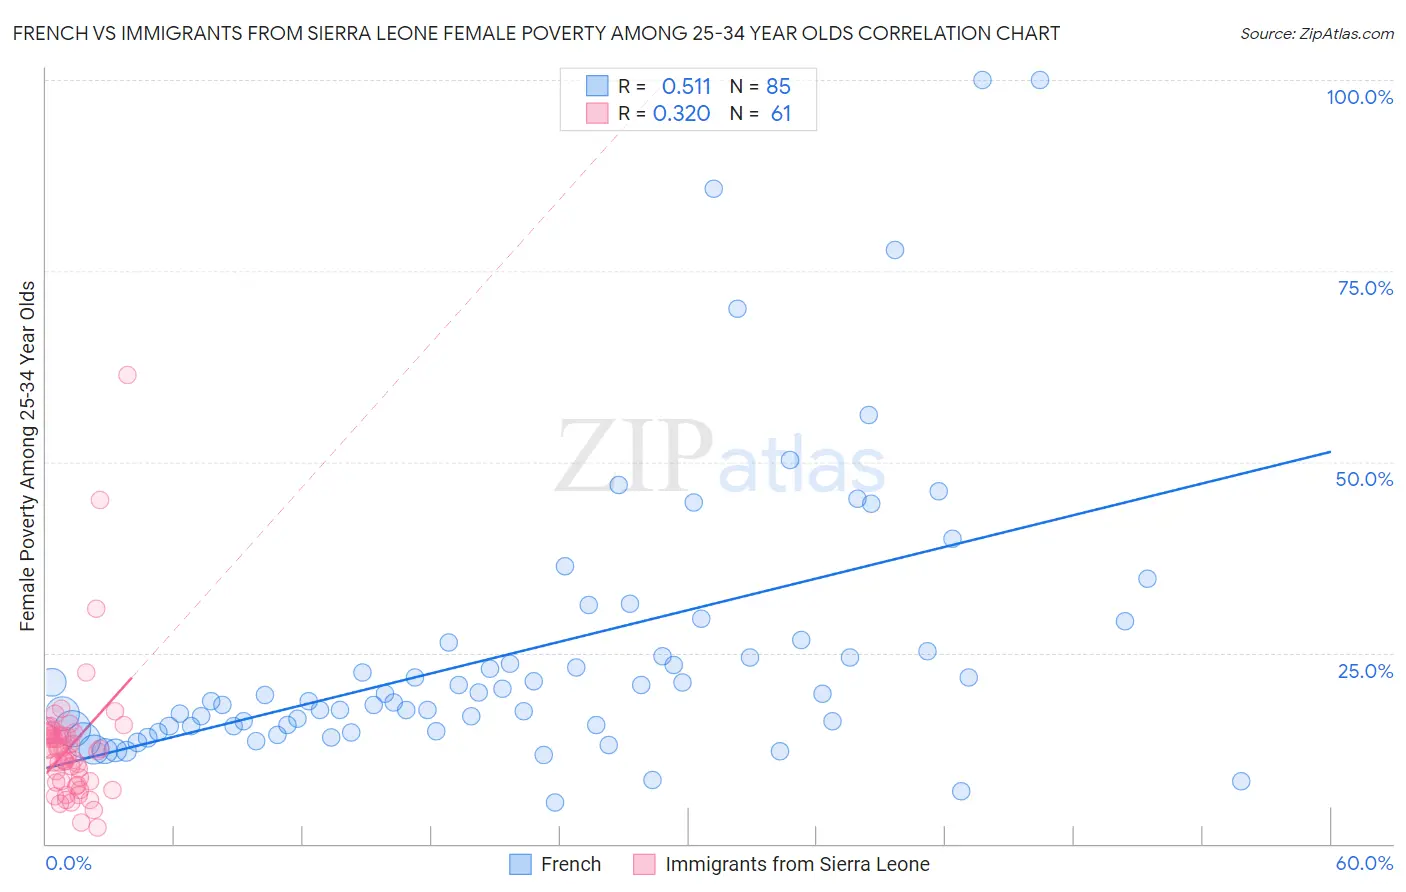 French vs Immigrants from Sierra Leone Female Poverty Among 25-34 Year Olds